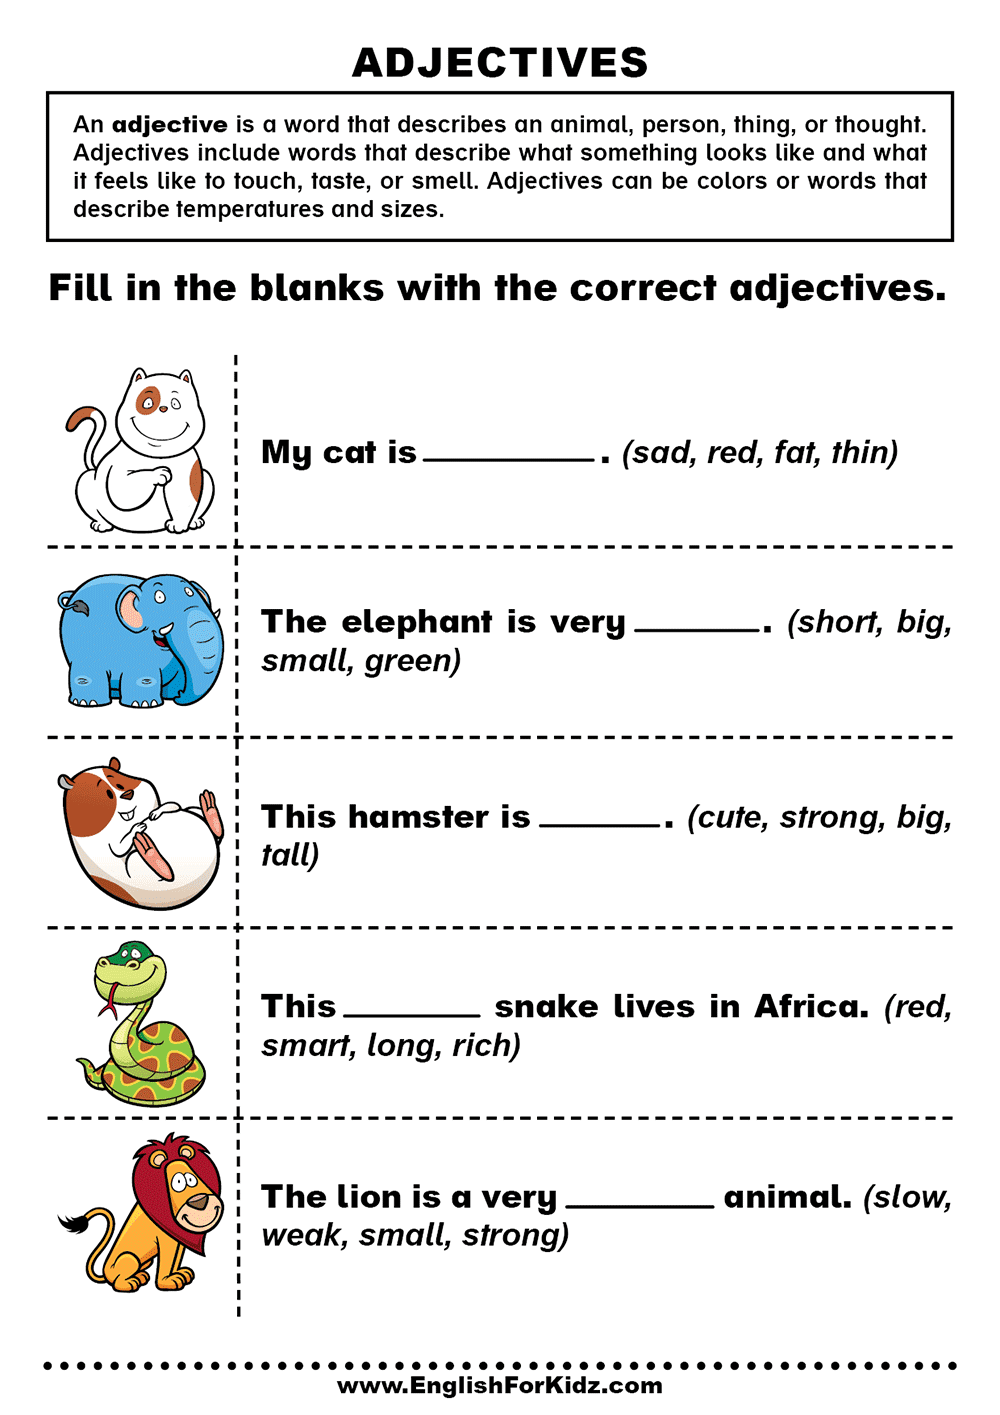 Free Printable Adjectives Worksheets For Grade 1 Grade 1 Adjectives Worksheets K5 Learning